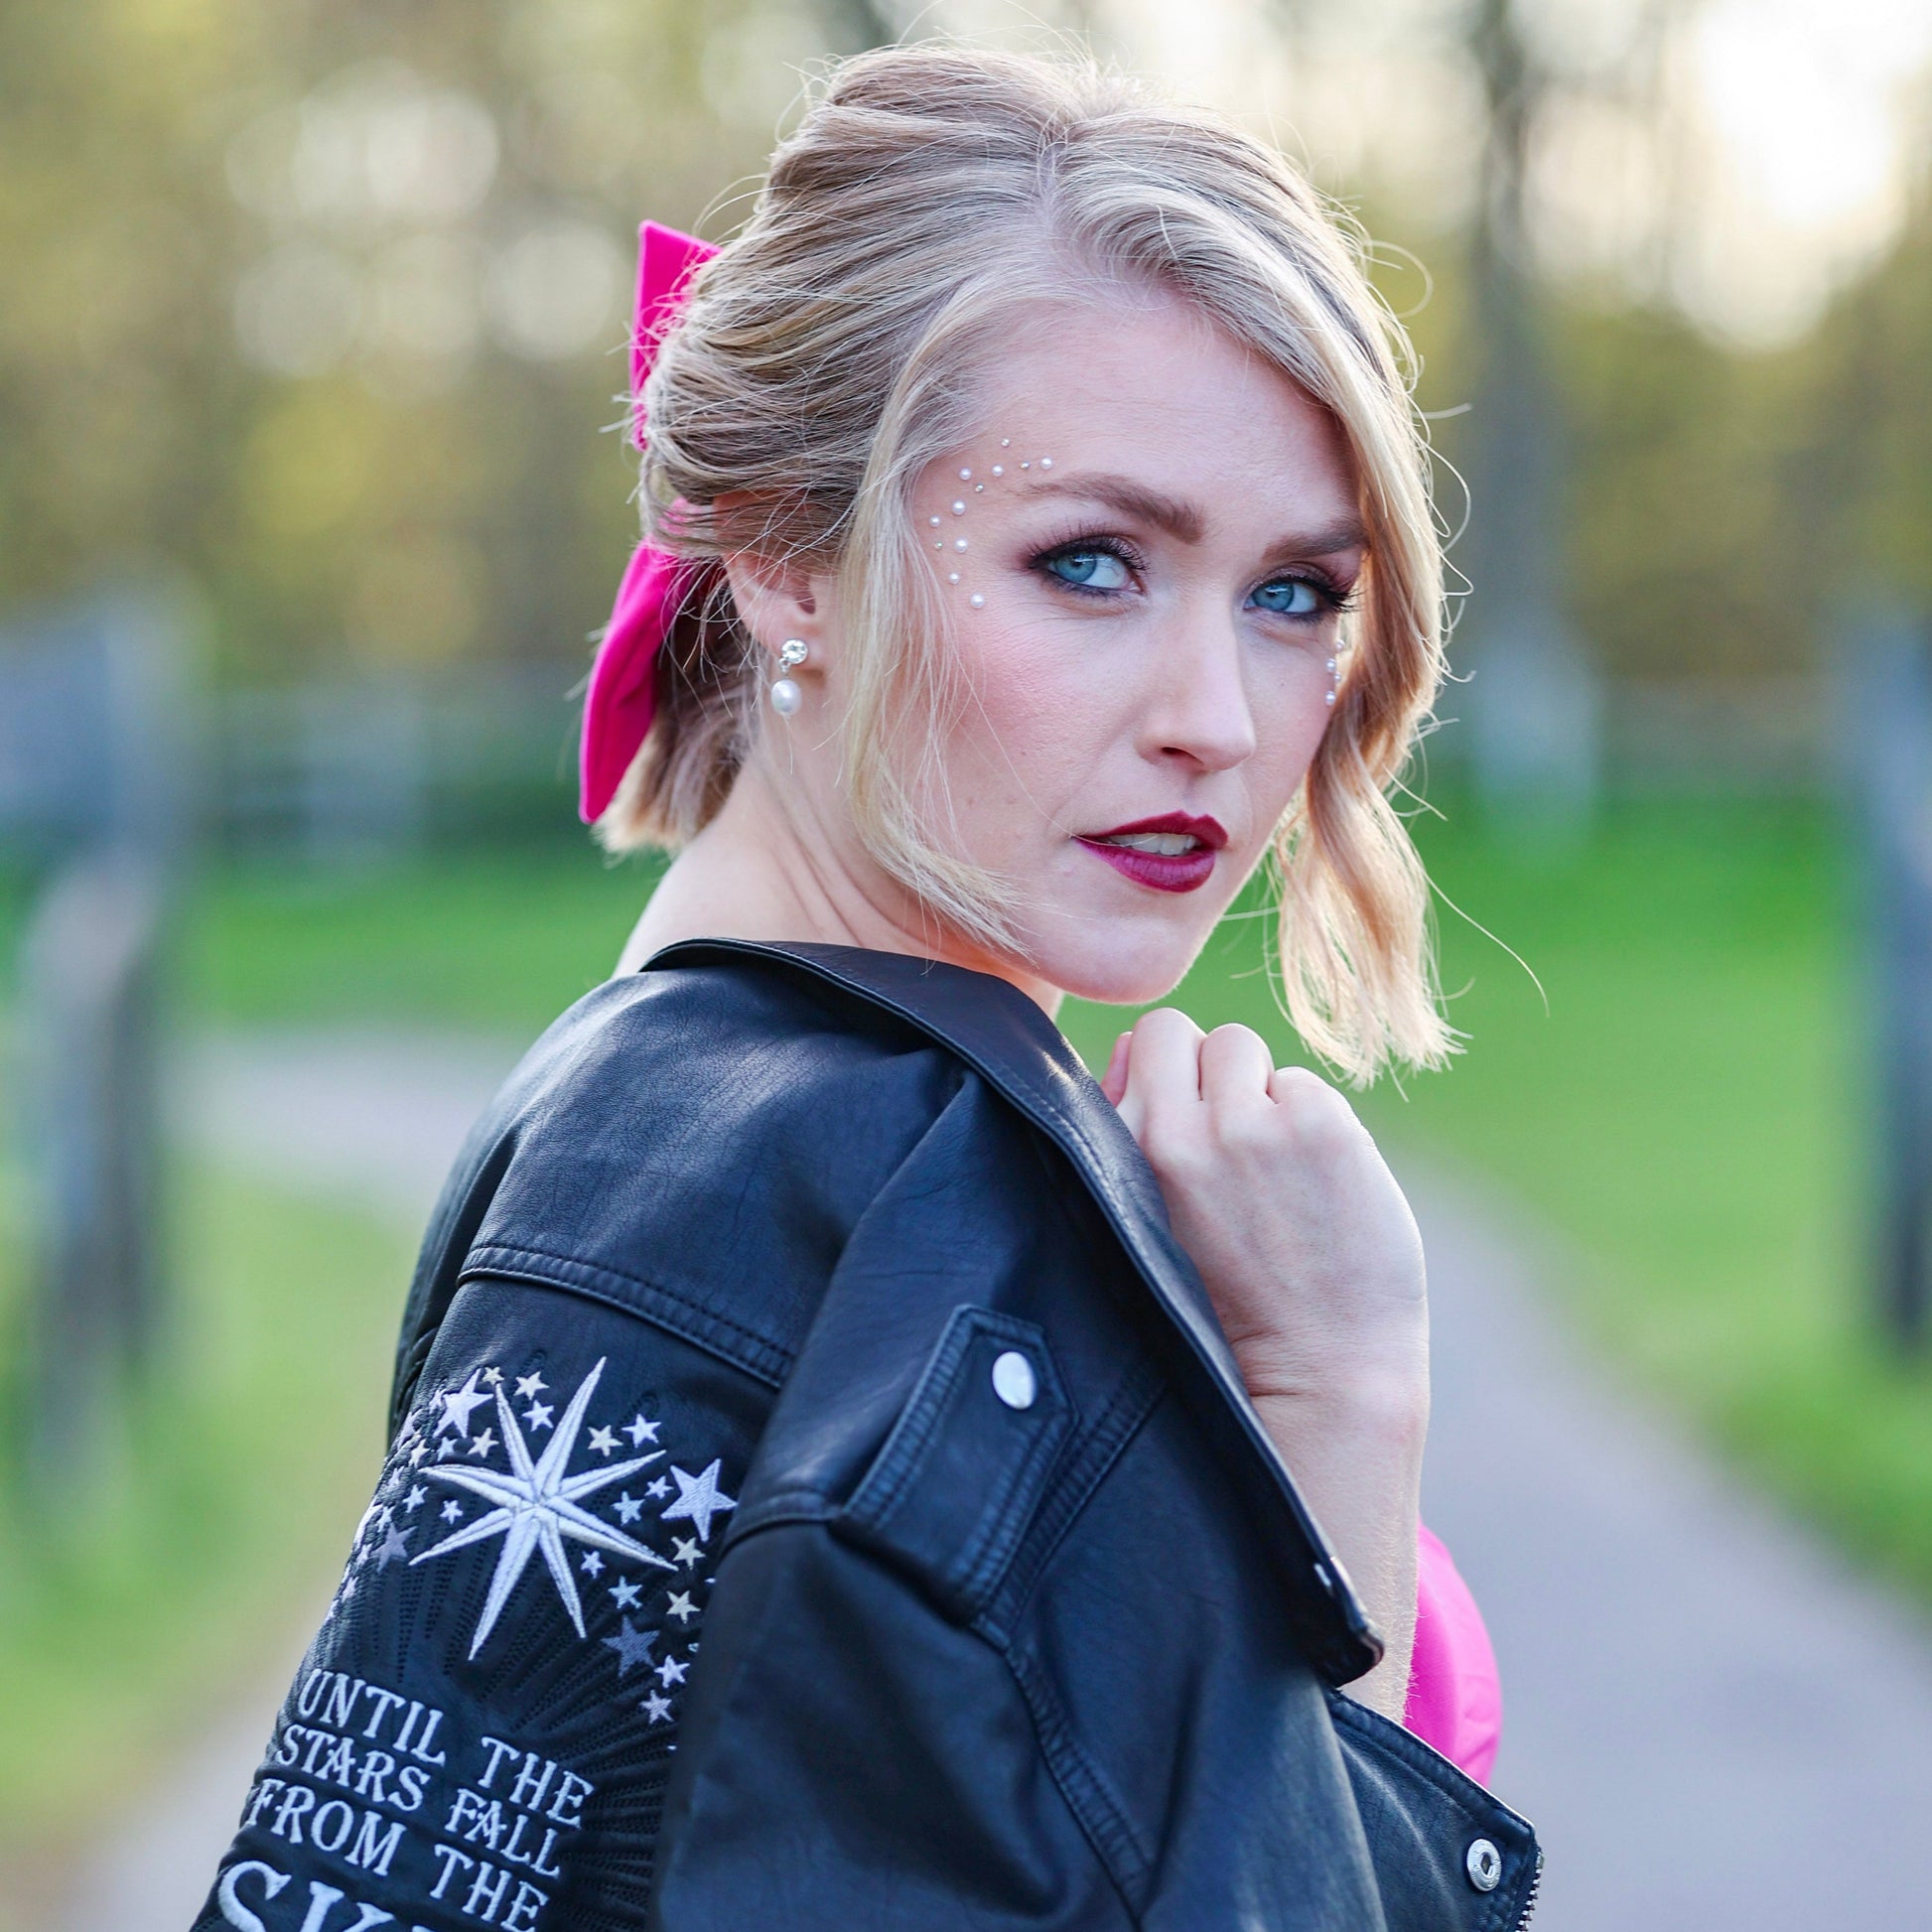 Bridal leather jacket with celestial motifs and a romantic message, perfect for a starlit wedding night